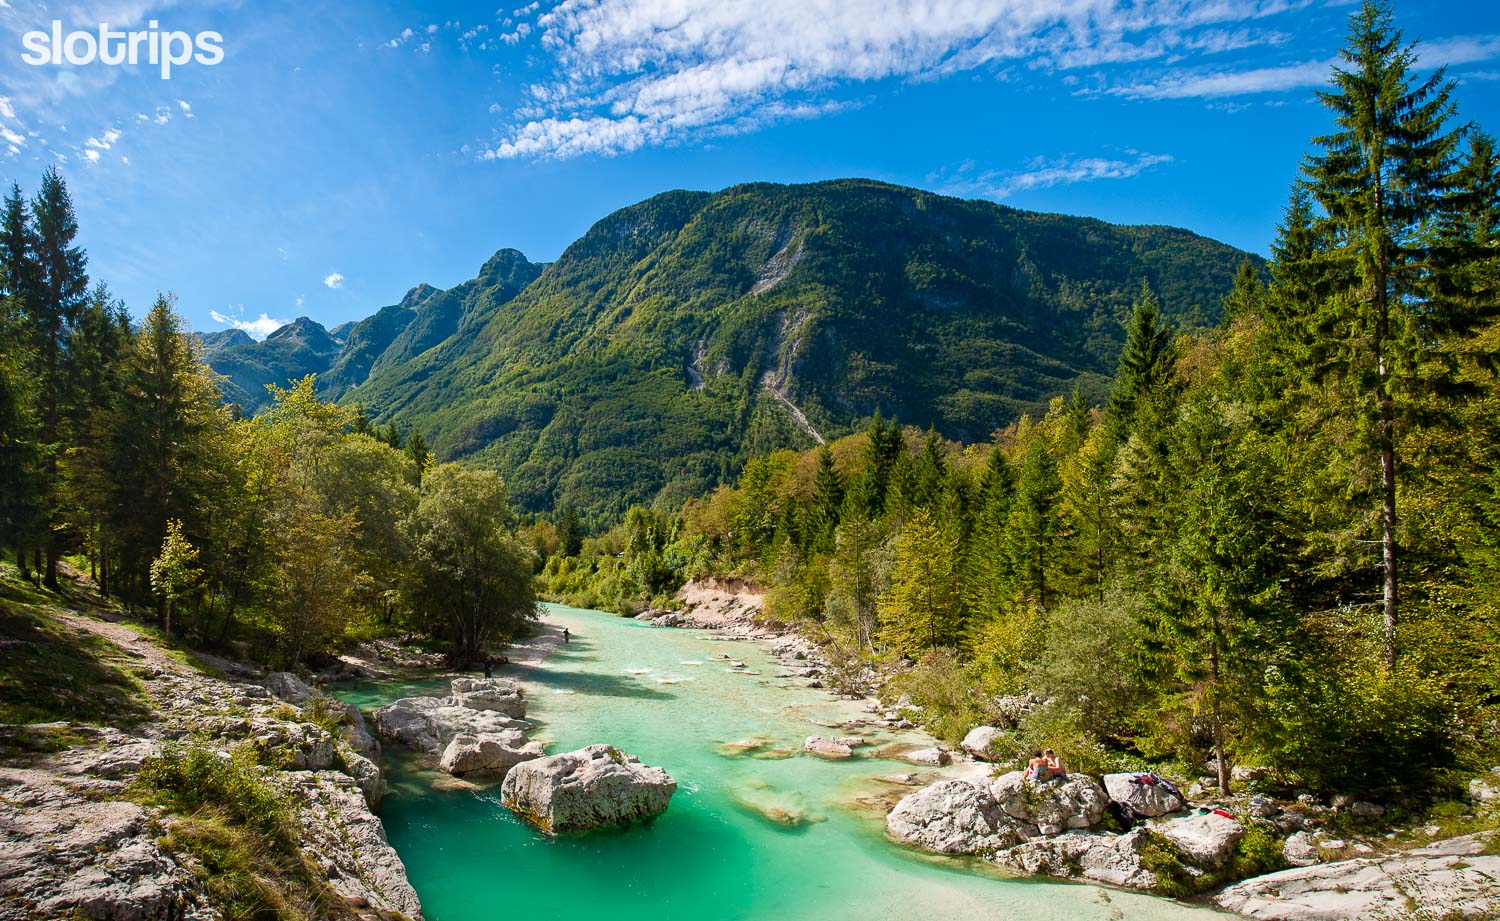 The turquoise color of Soca river in Julian Alps, Slovenia